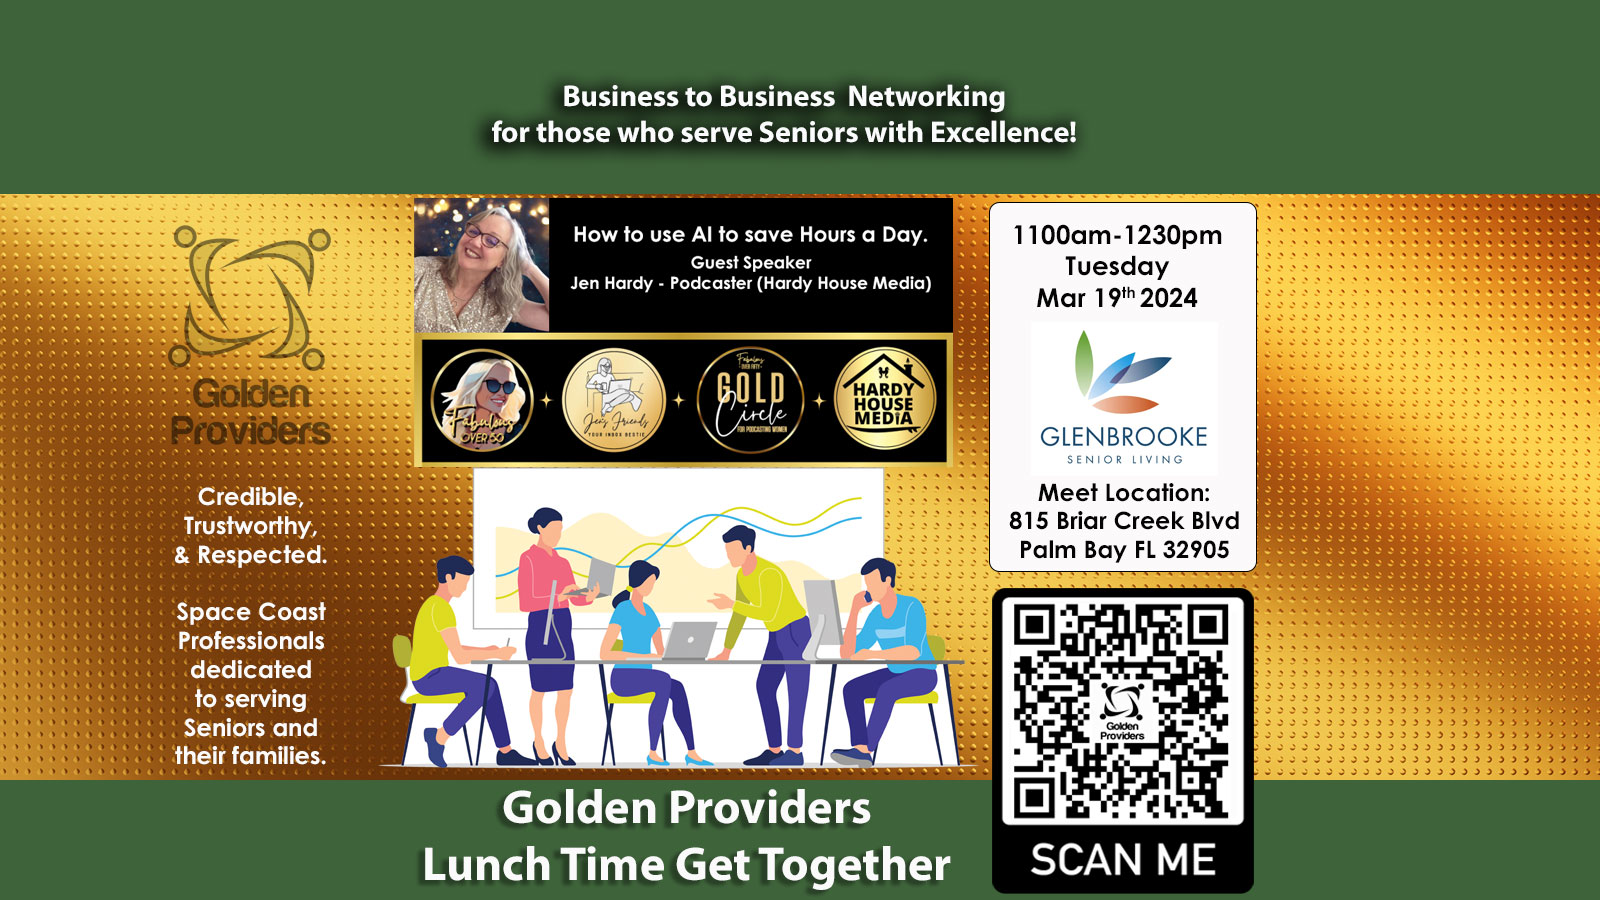 Golden Providers - March 2024